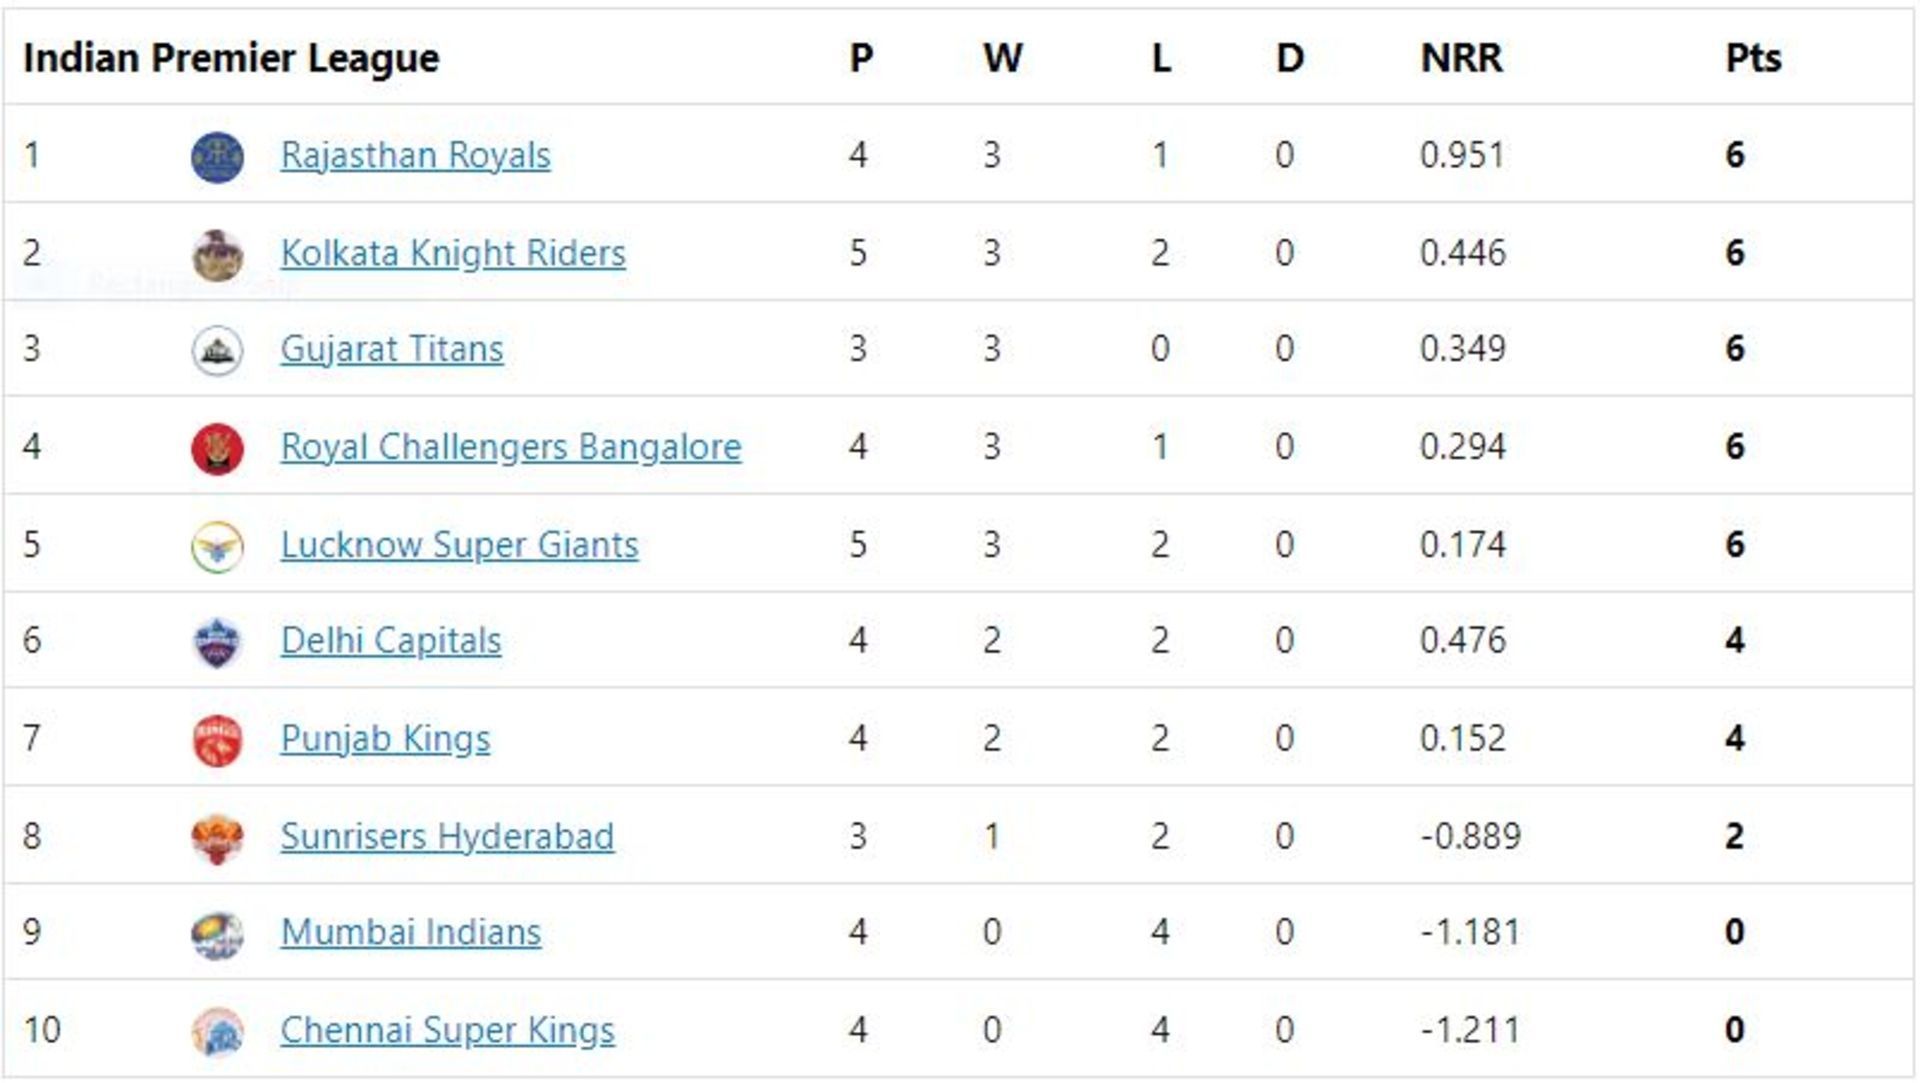 Rajasthan Royals are back to the top of the table